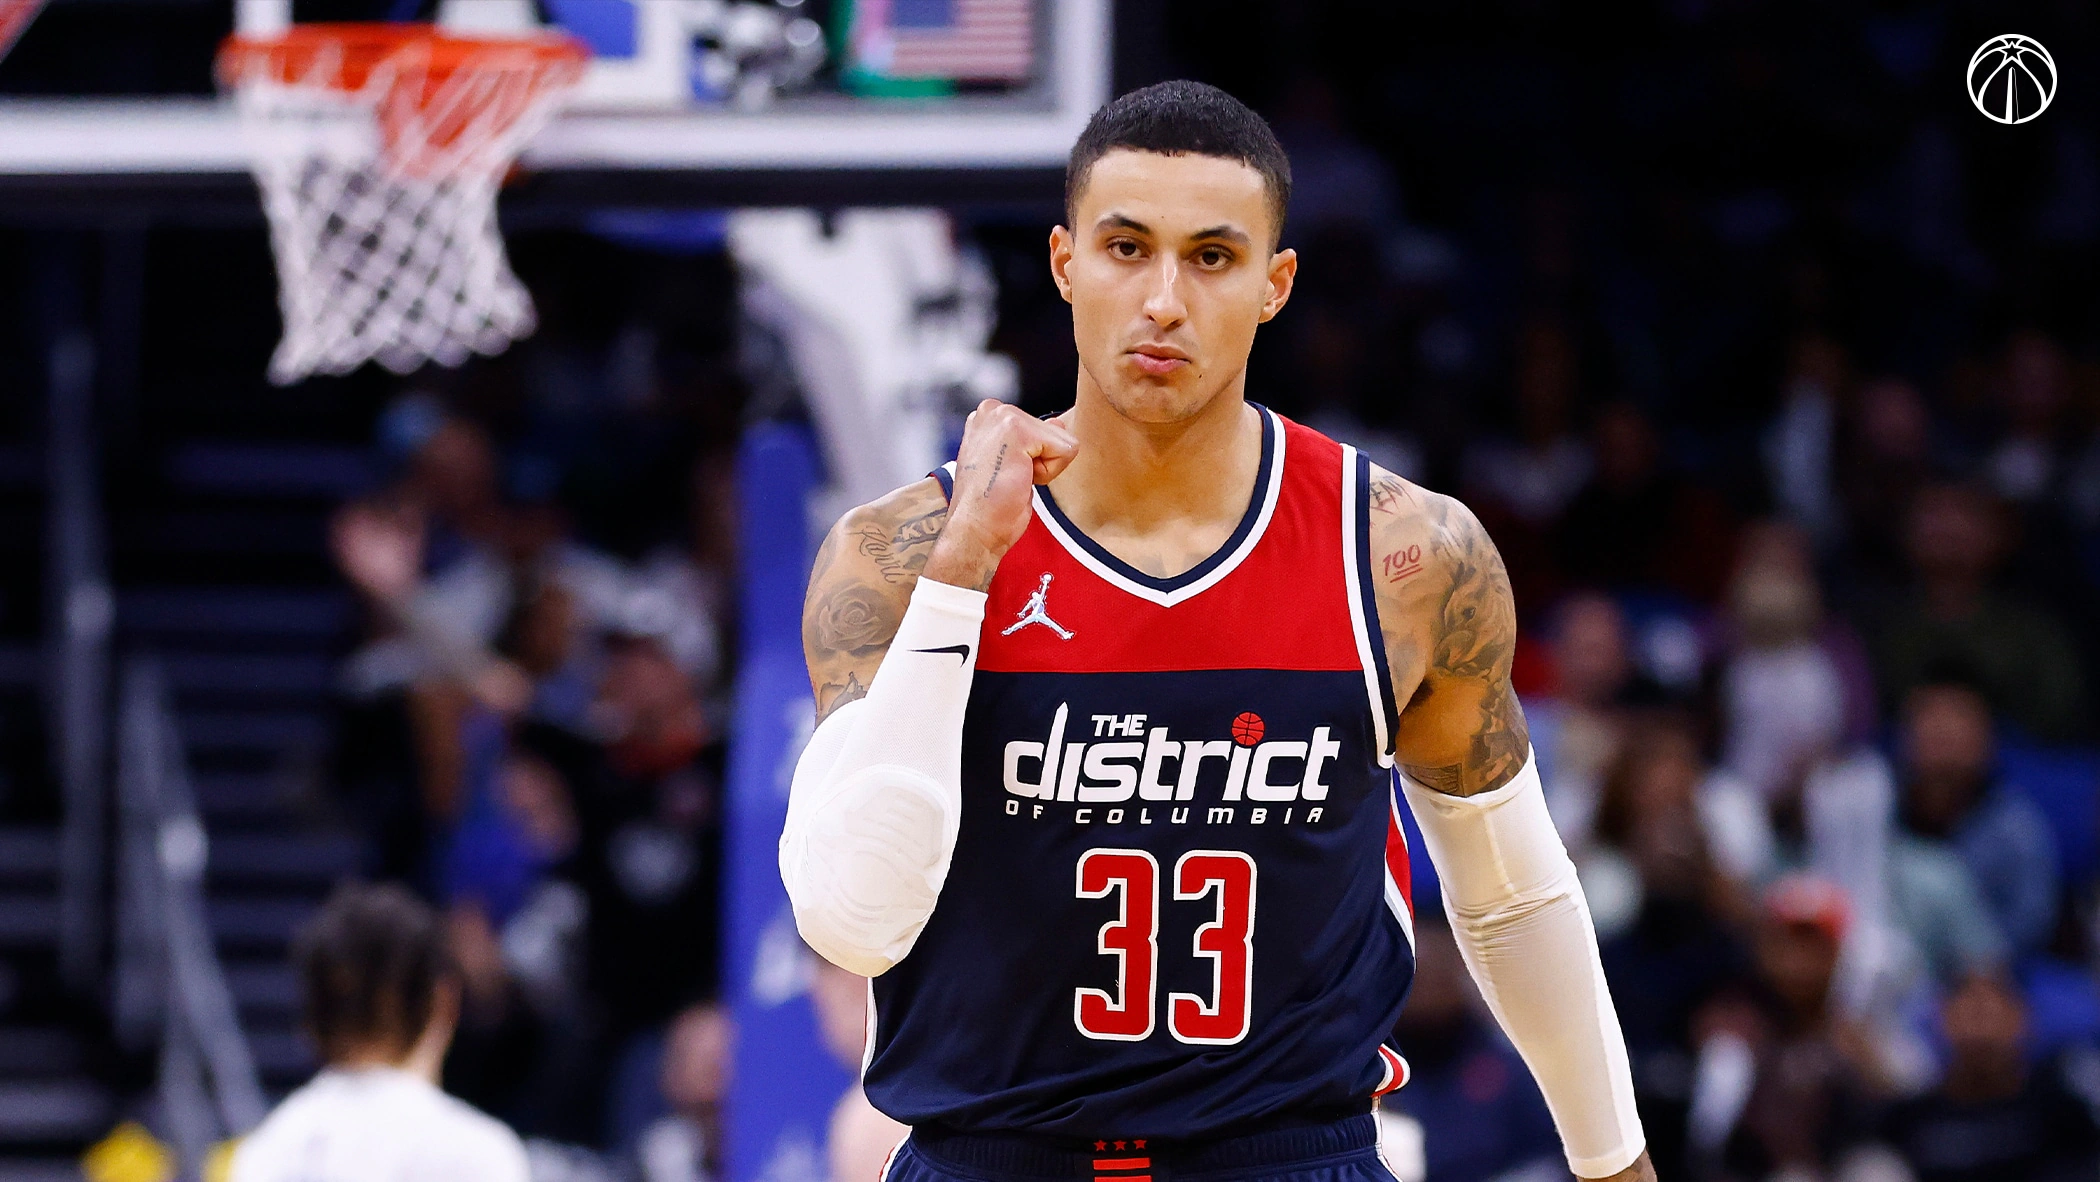 After the Wizards’ Crushing, Tari Eason of the Rockets Viciously Brings up an Old Kyle Kuzma Comment to Troll